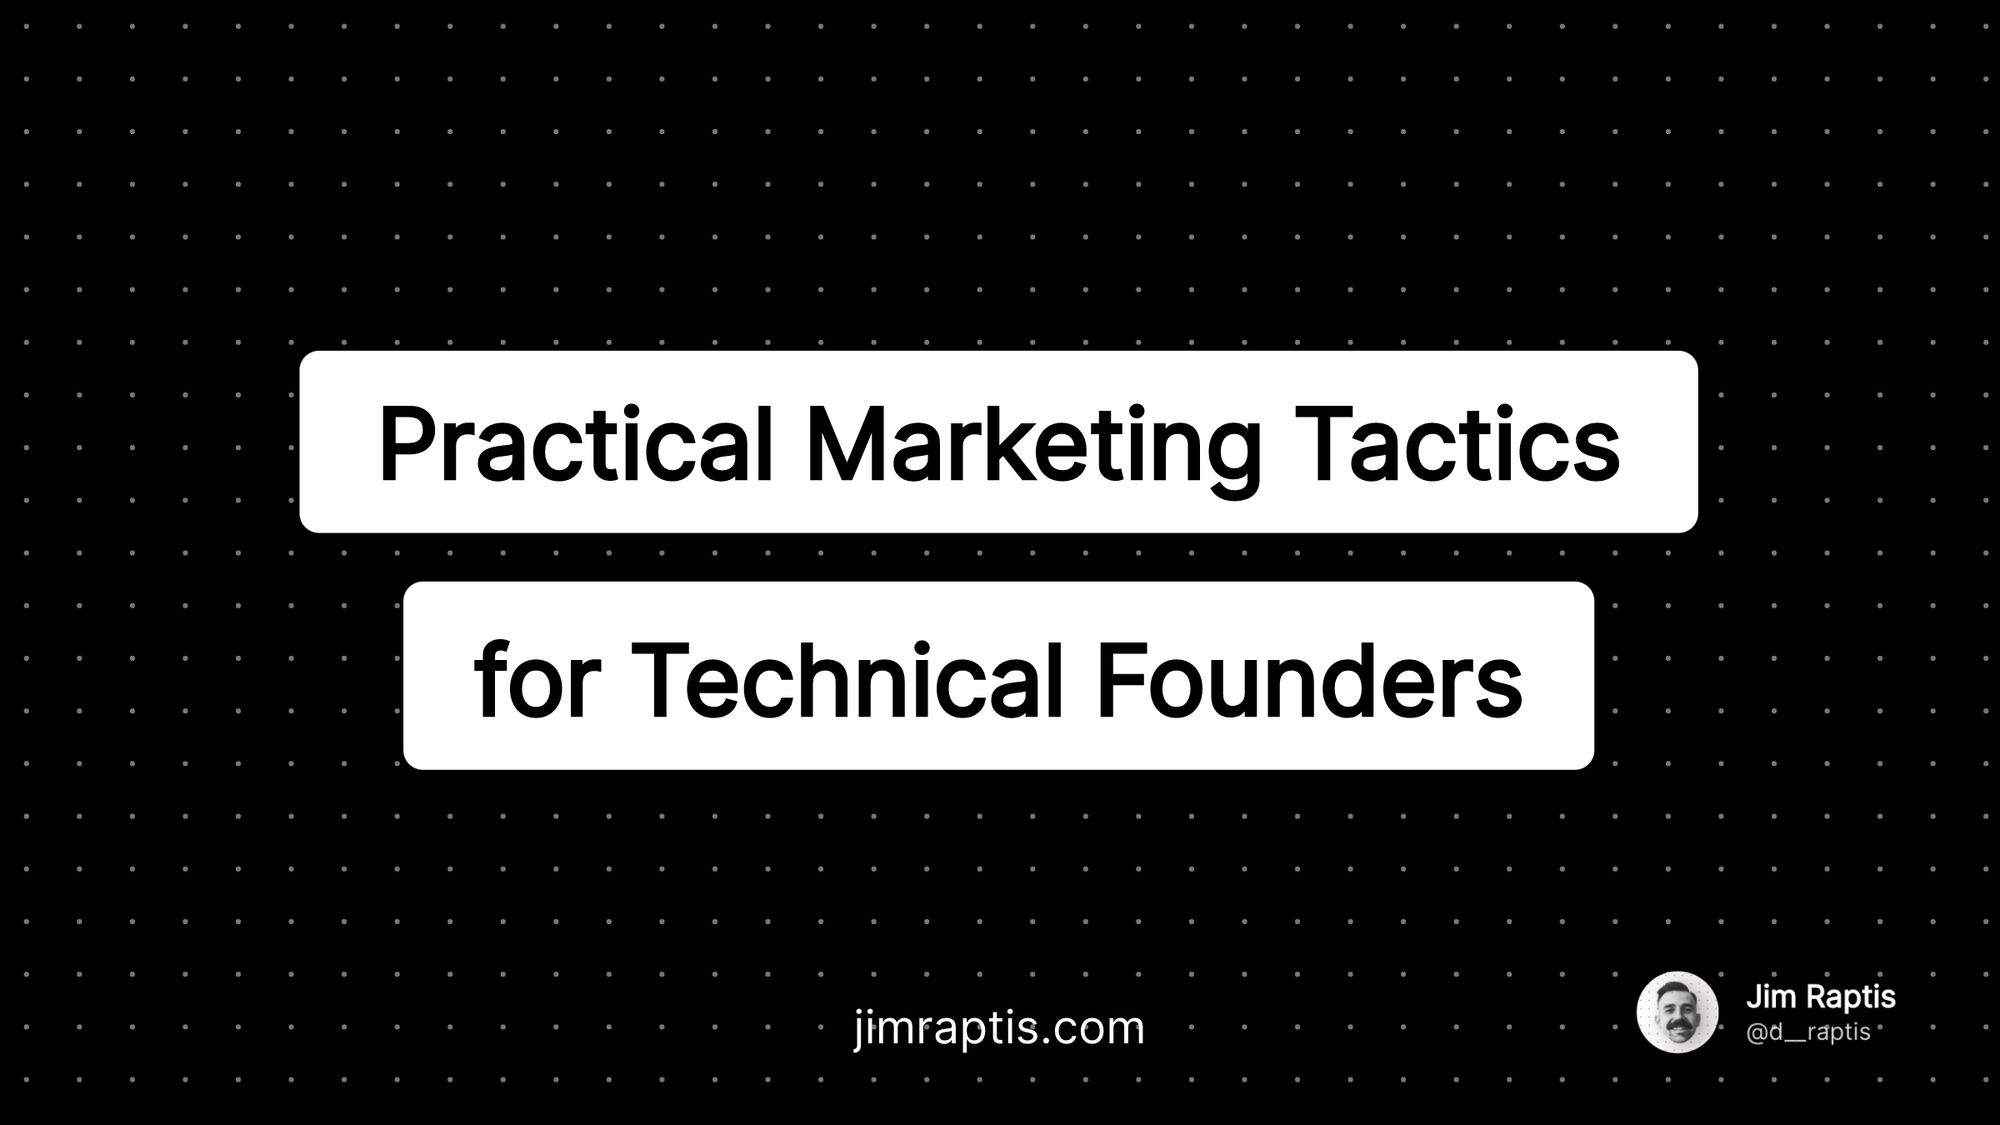 Marketing tactics for technical founders